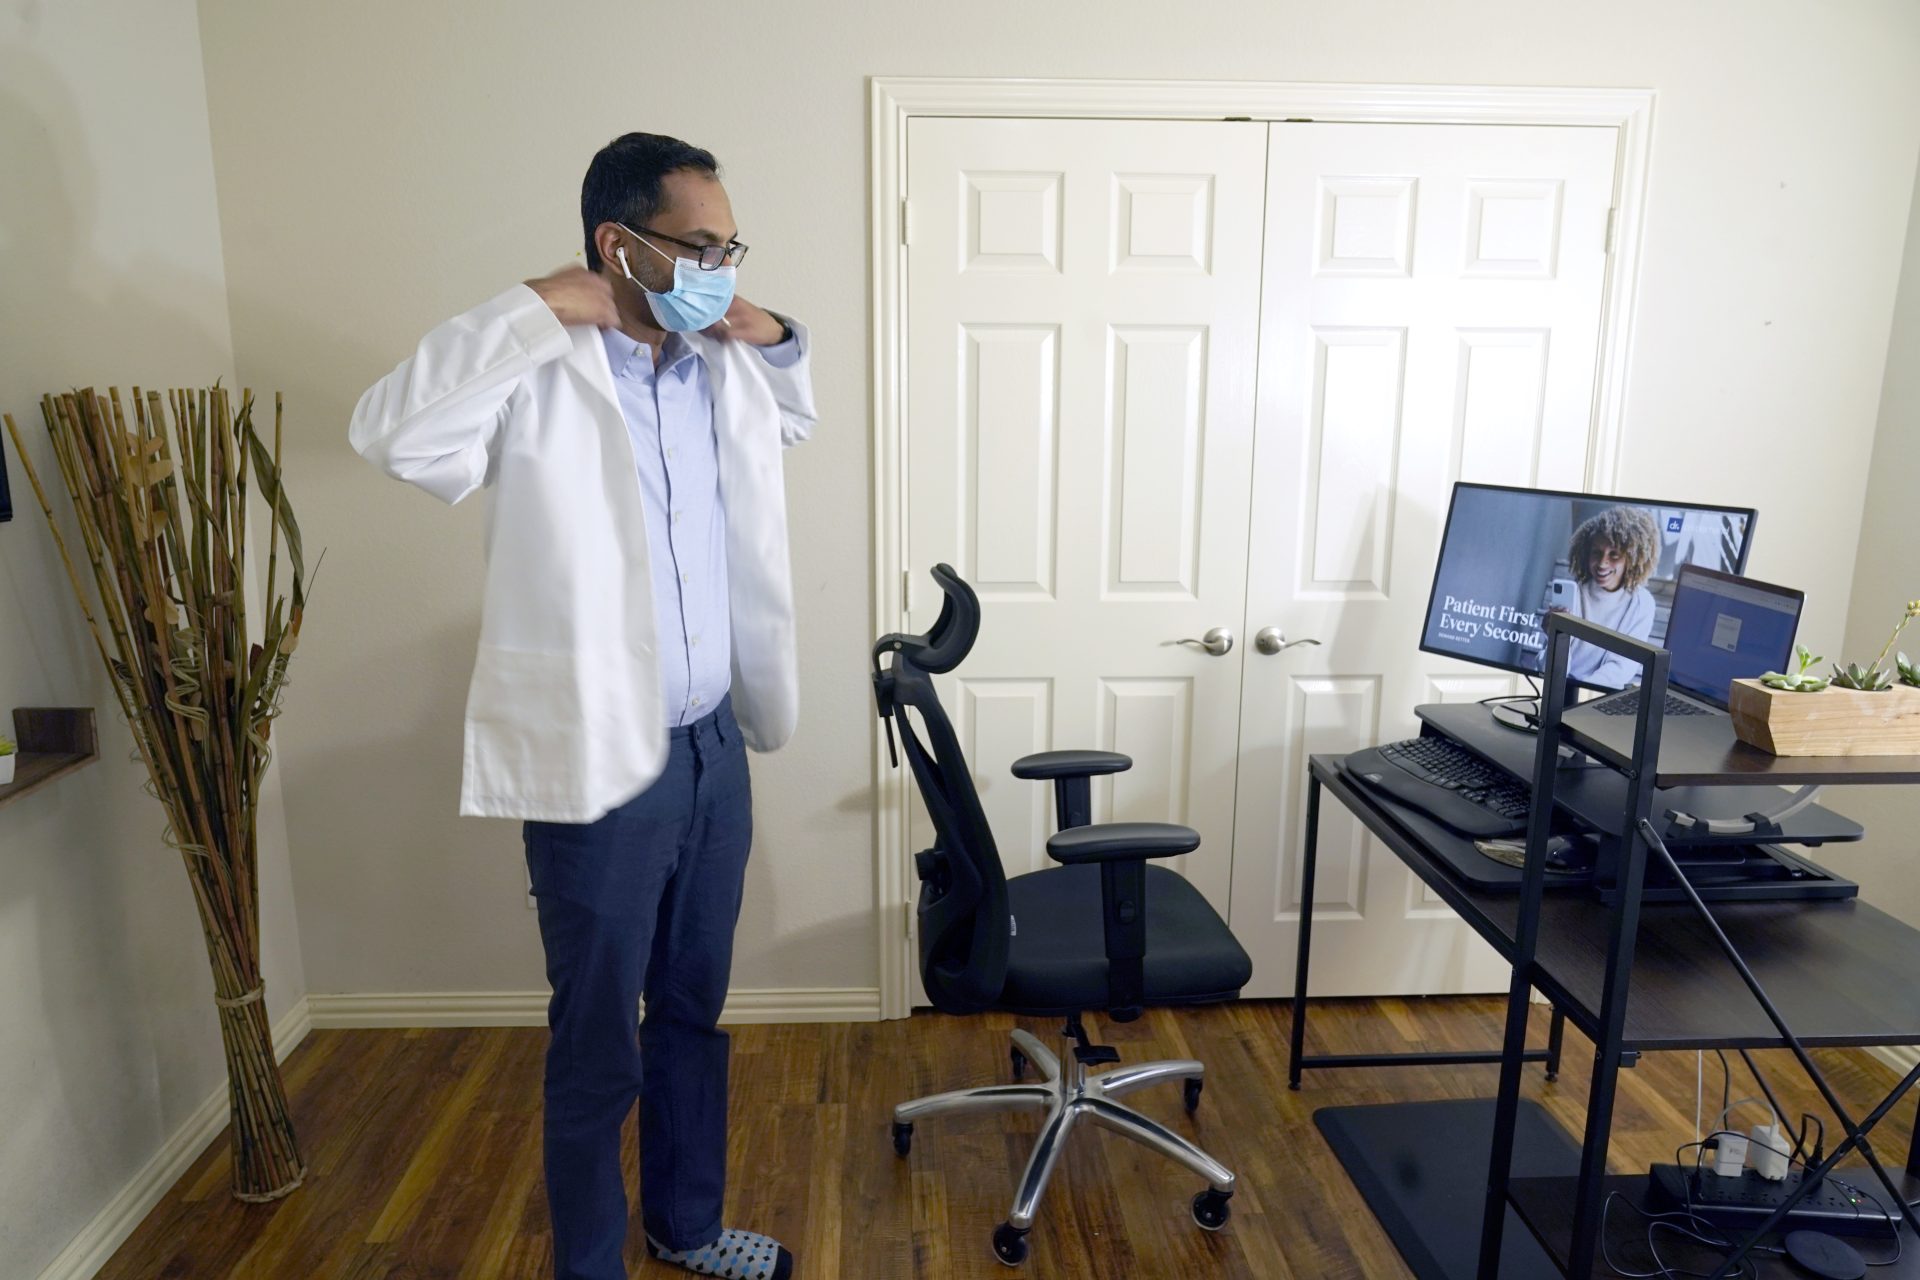 Medical director of Doctor on Demand Dr. Vibin Roy prepares to conduct an online visit with a patient from his work station at home, April 23, 2021, in Keller, Texas.